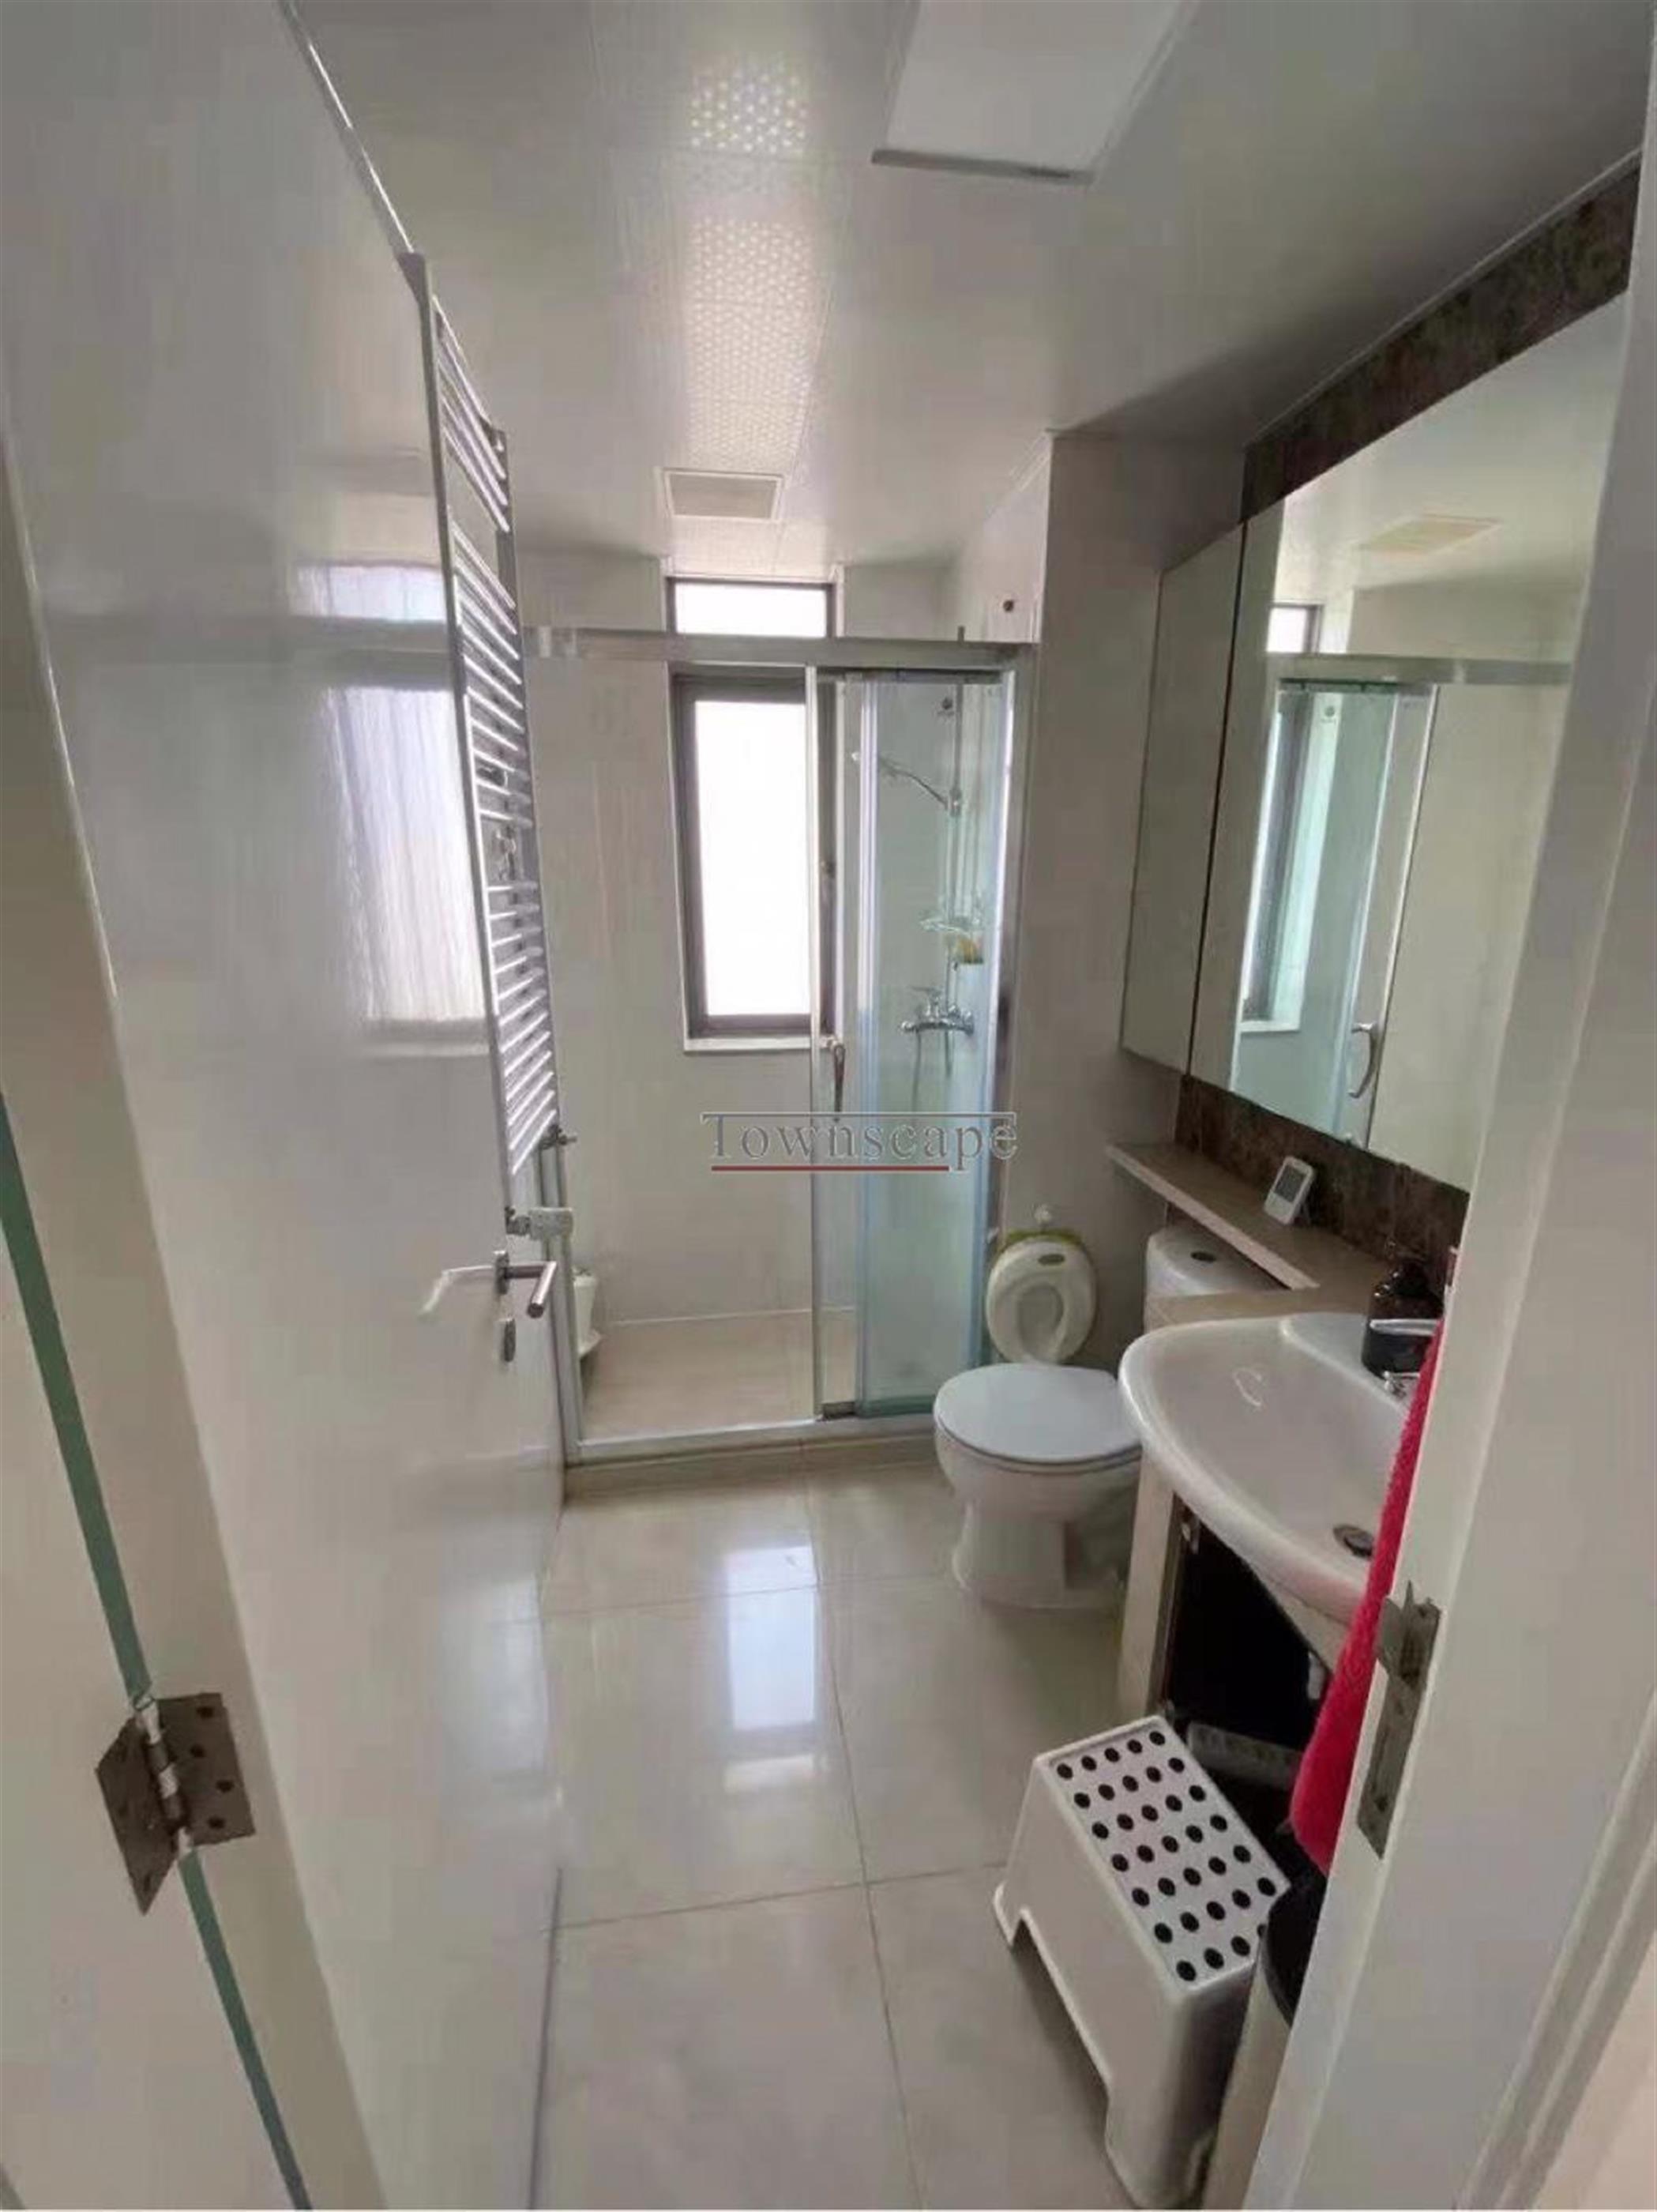 Bright Bathroom Fabulous Spacious Le Cite 3BR Apt in the Clouds Nr LN 1/9/11 for Rent in Shanghai’s Xujiahui